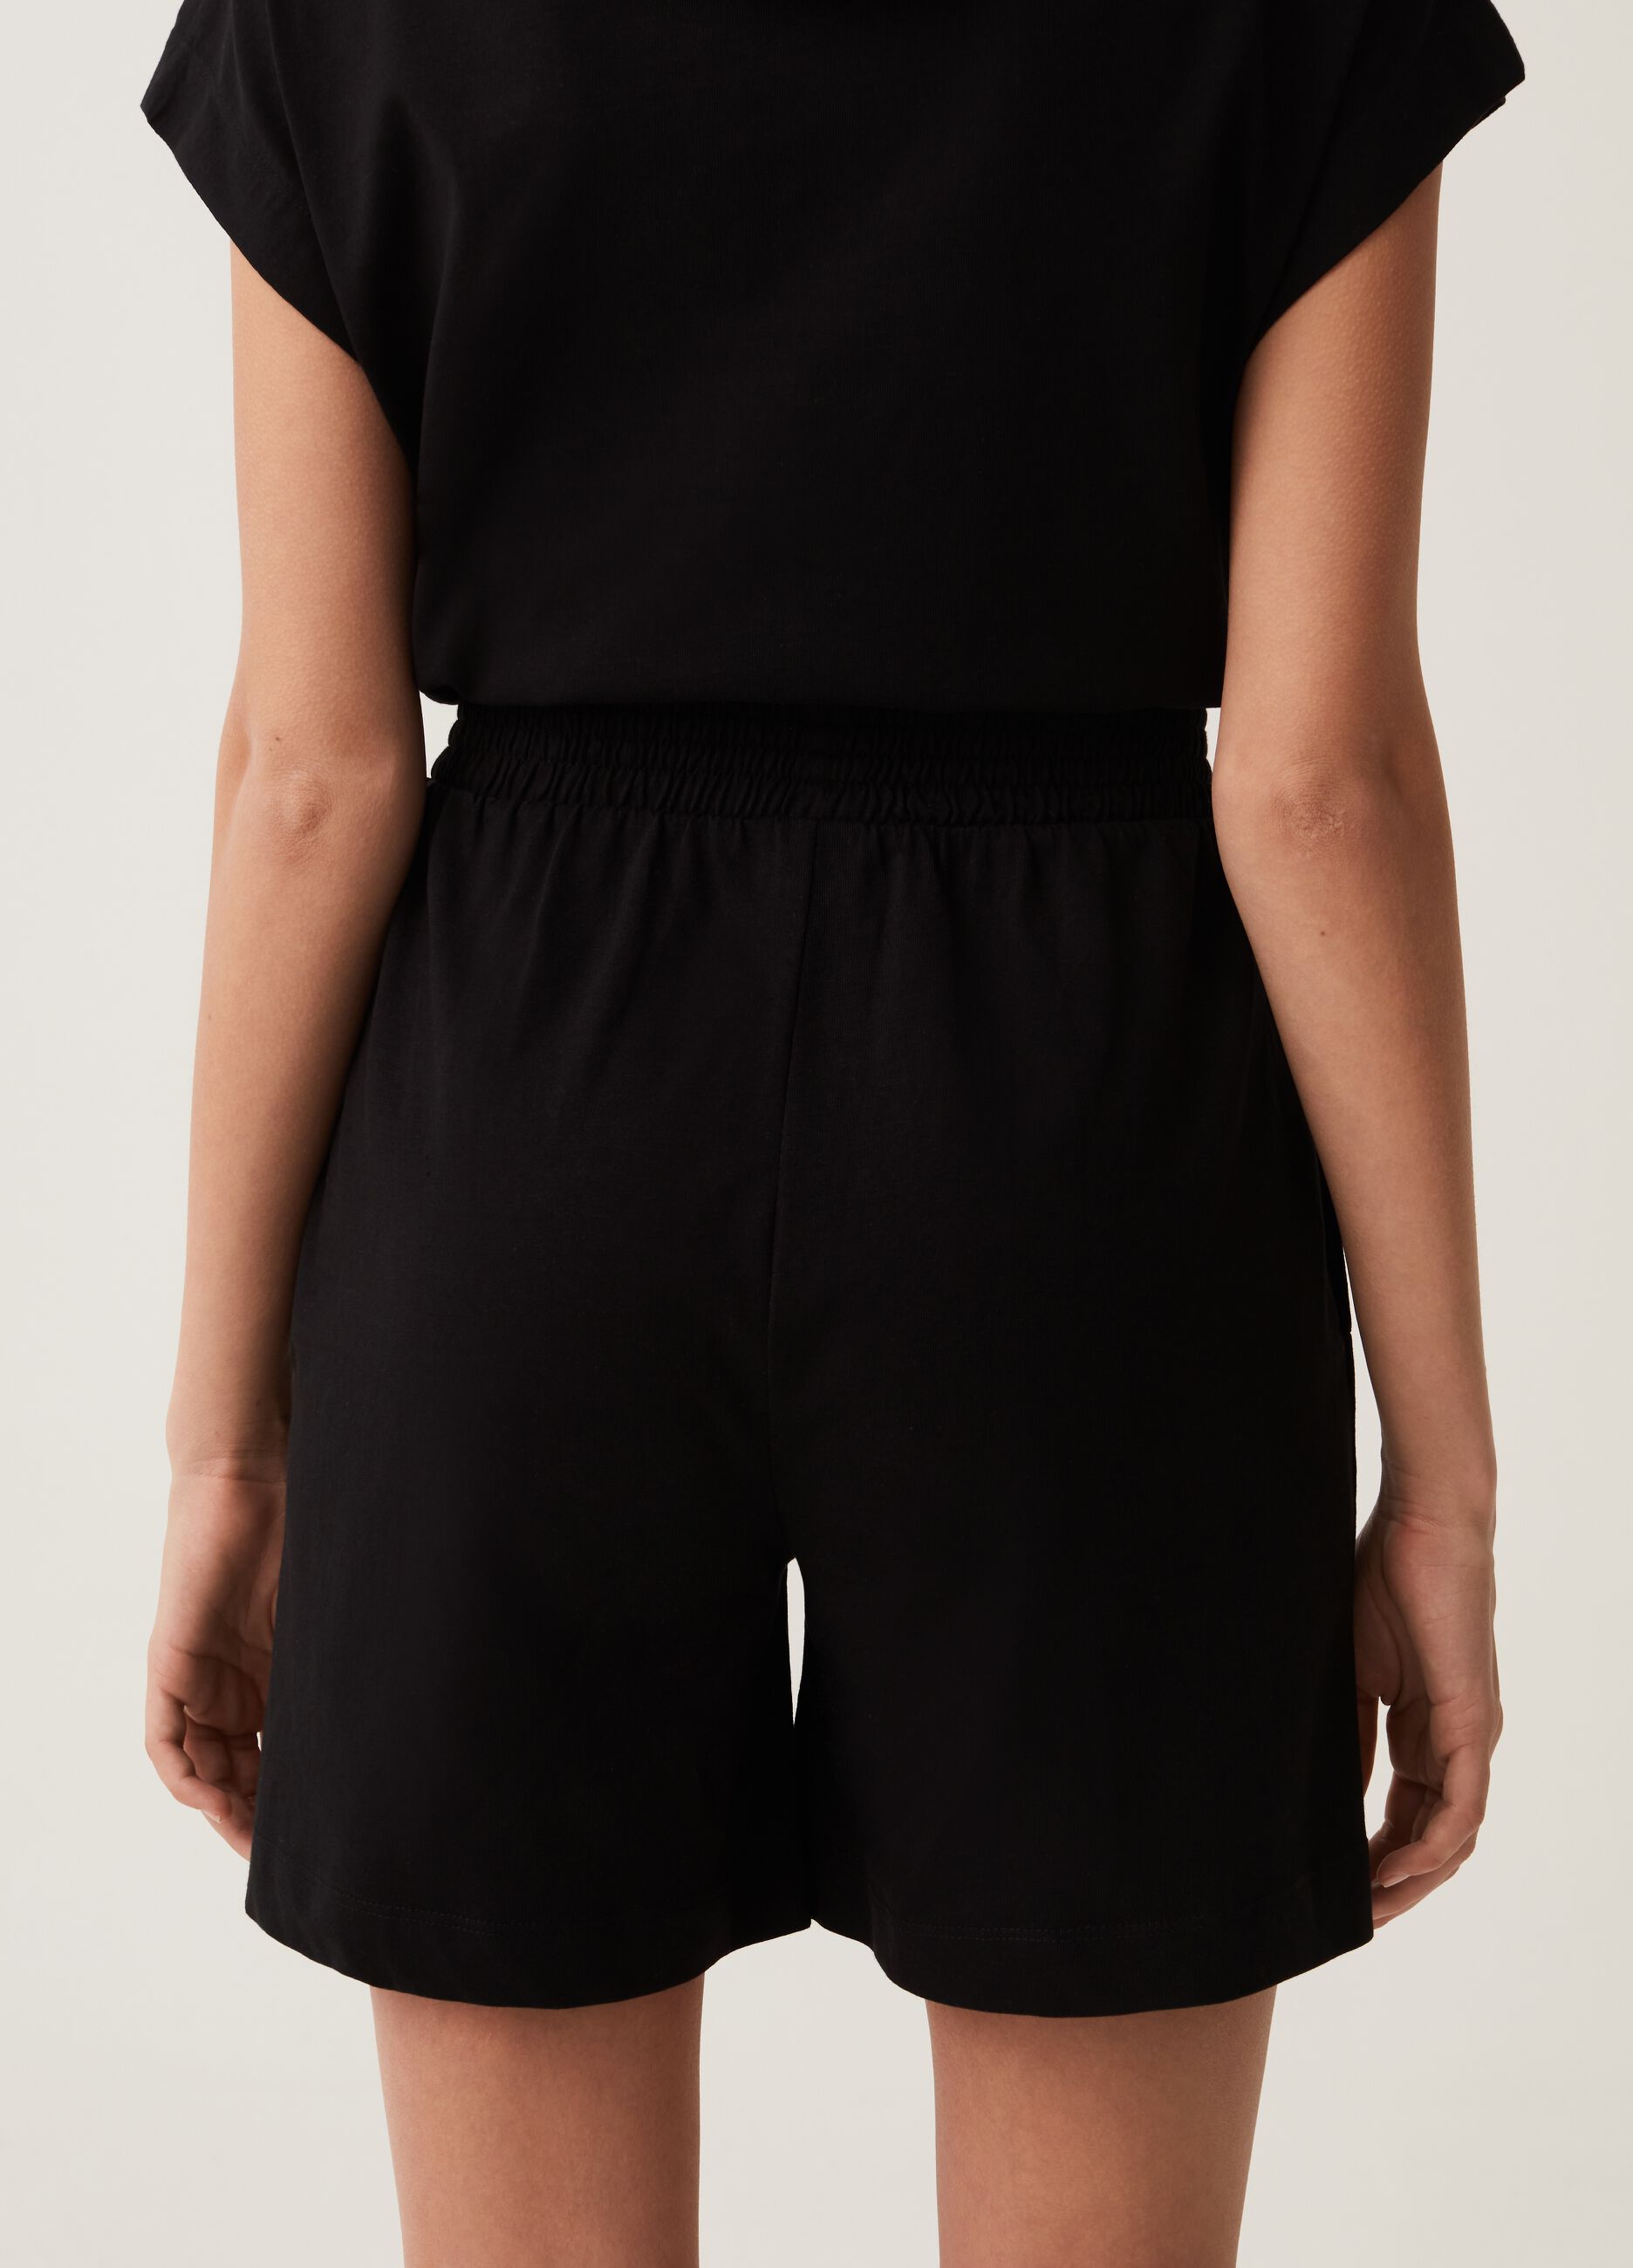 Fitness high-waisted cotton shorts